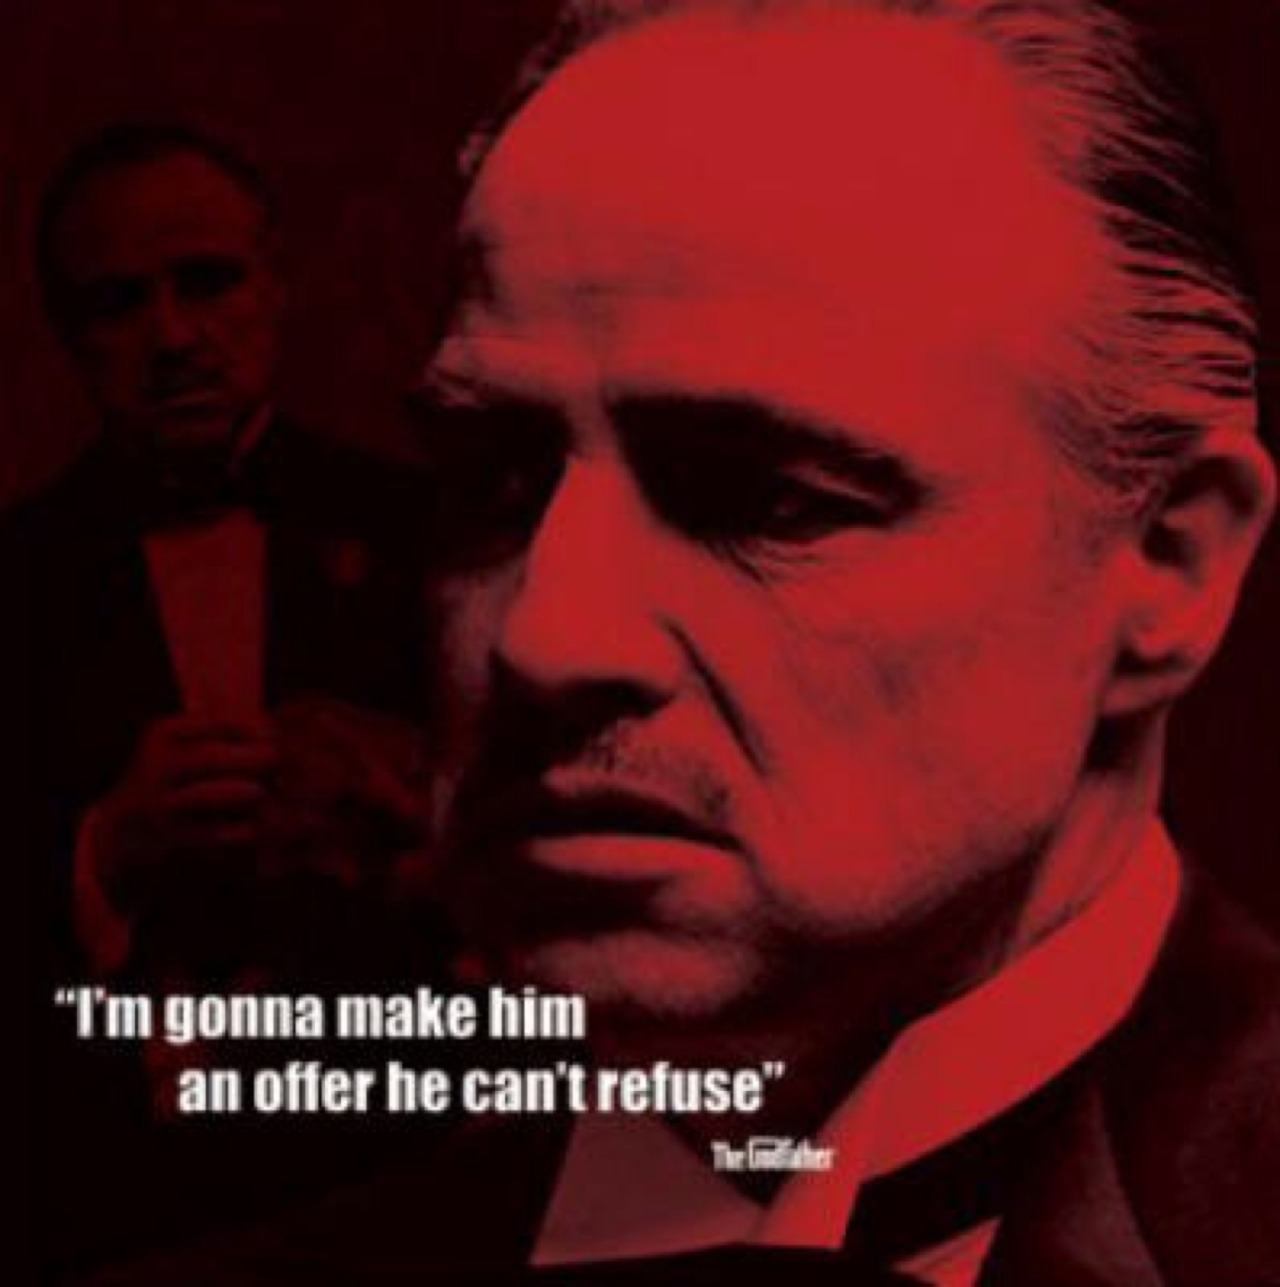 Love the godfather baby meme